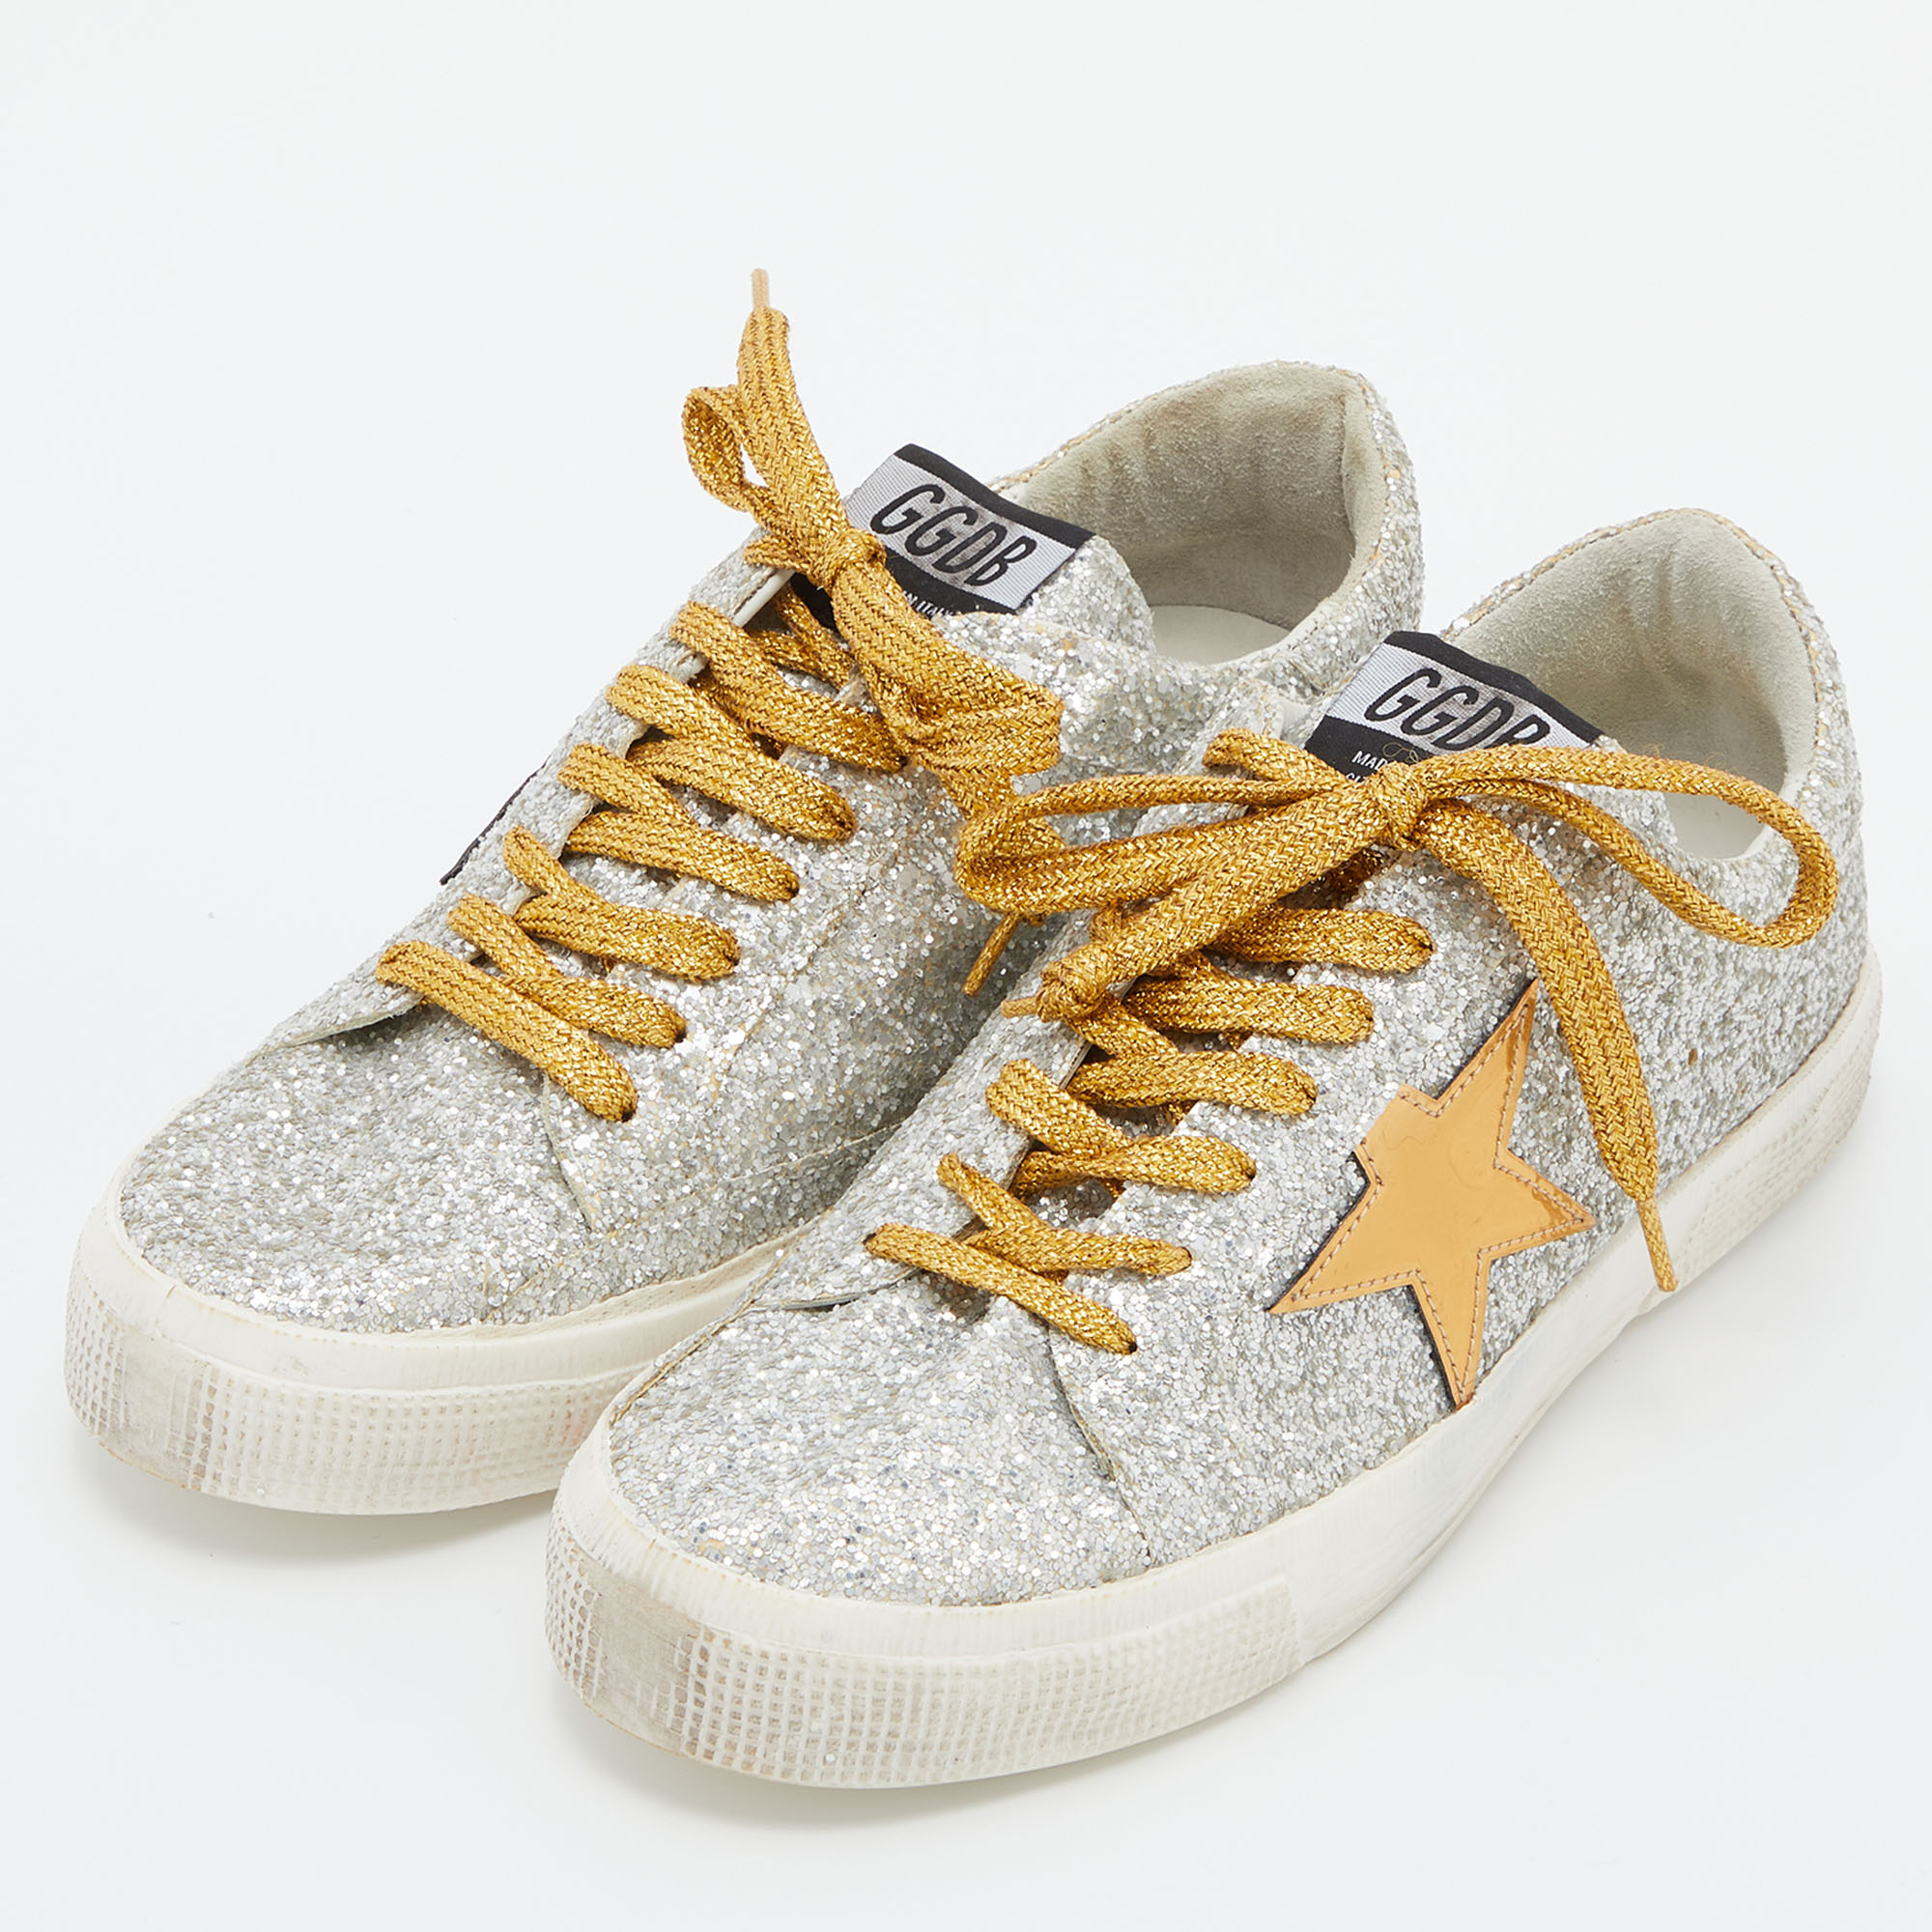 

Golden Goose Silver/Gold Glitter and Suede Hi Star Low-Top Sneakers Size